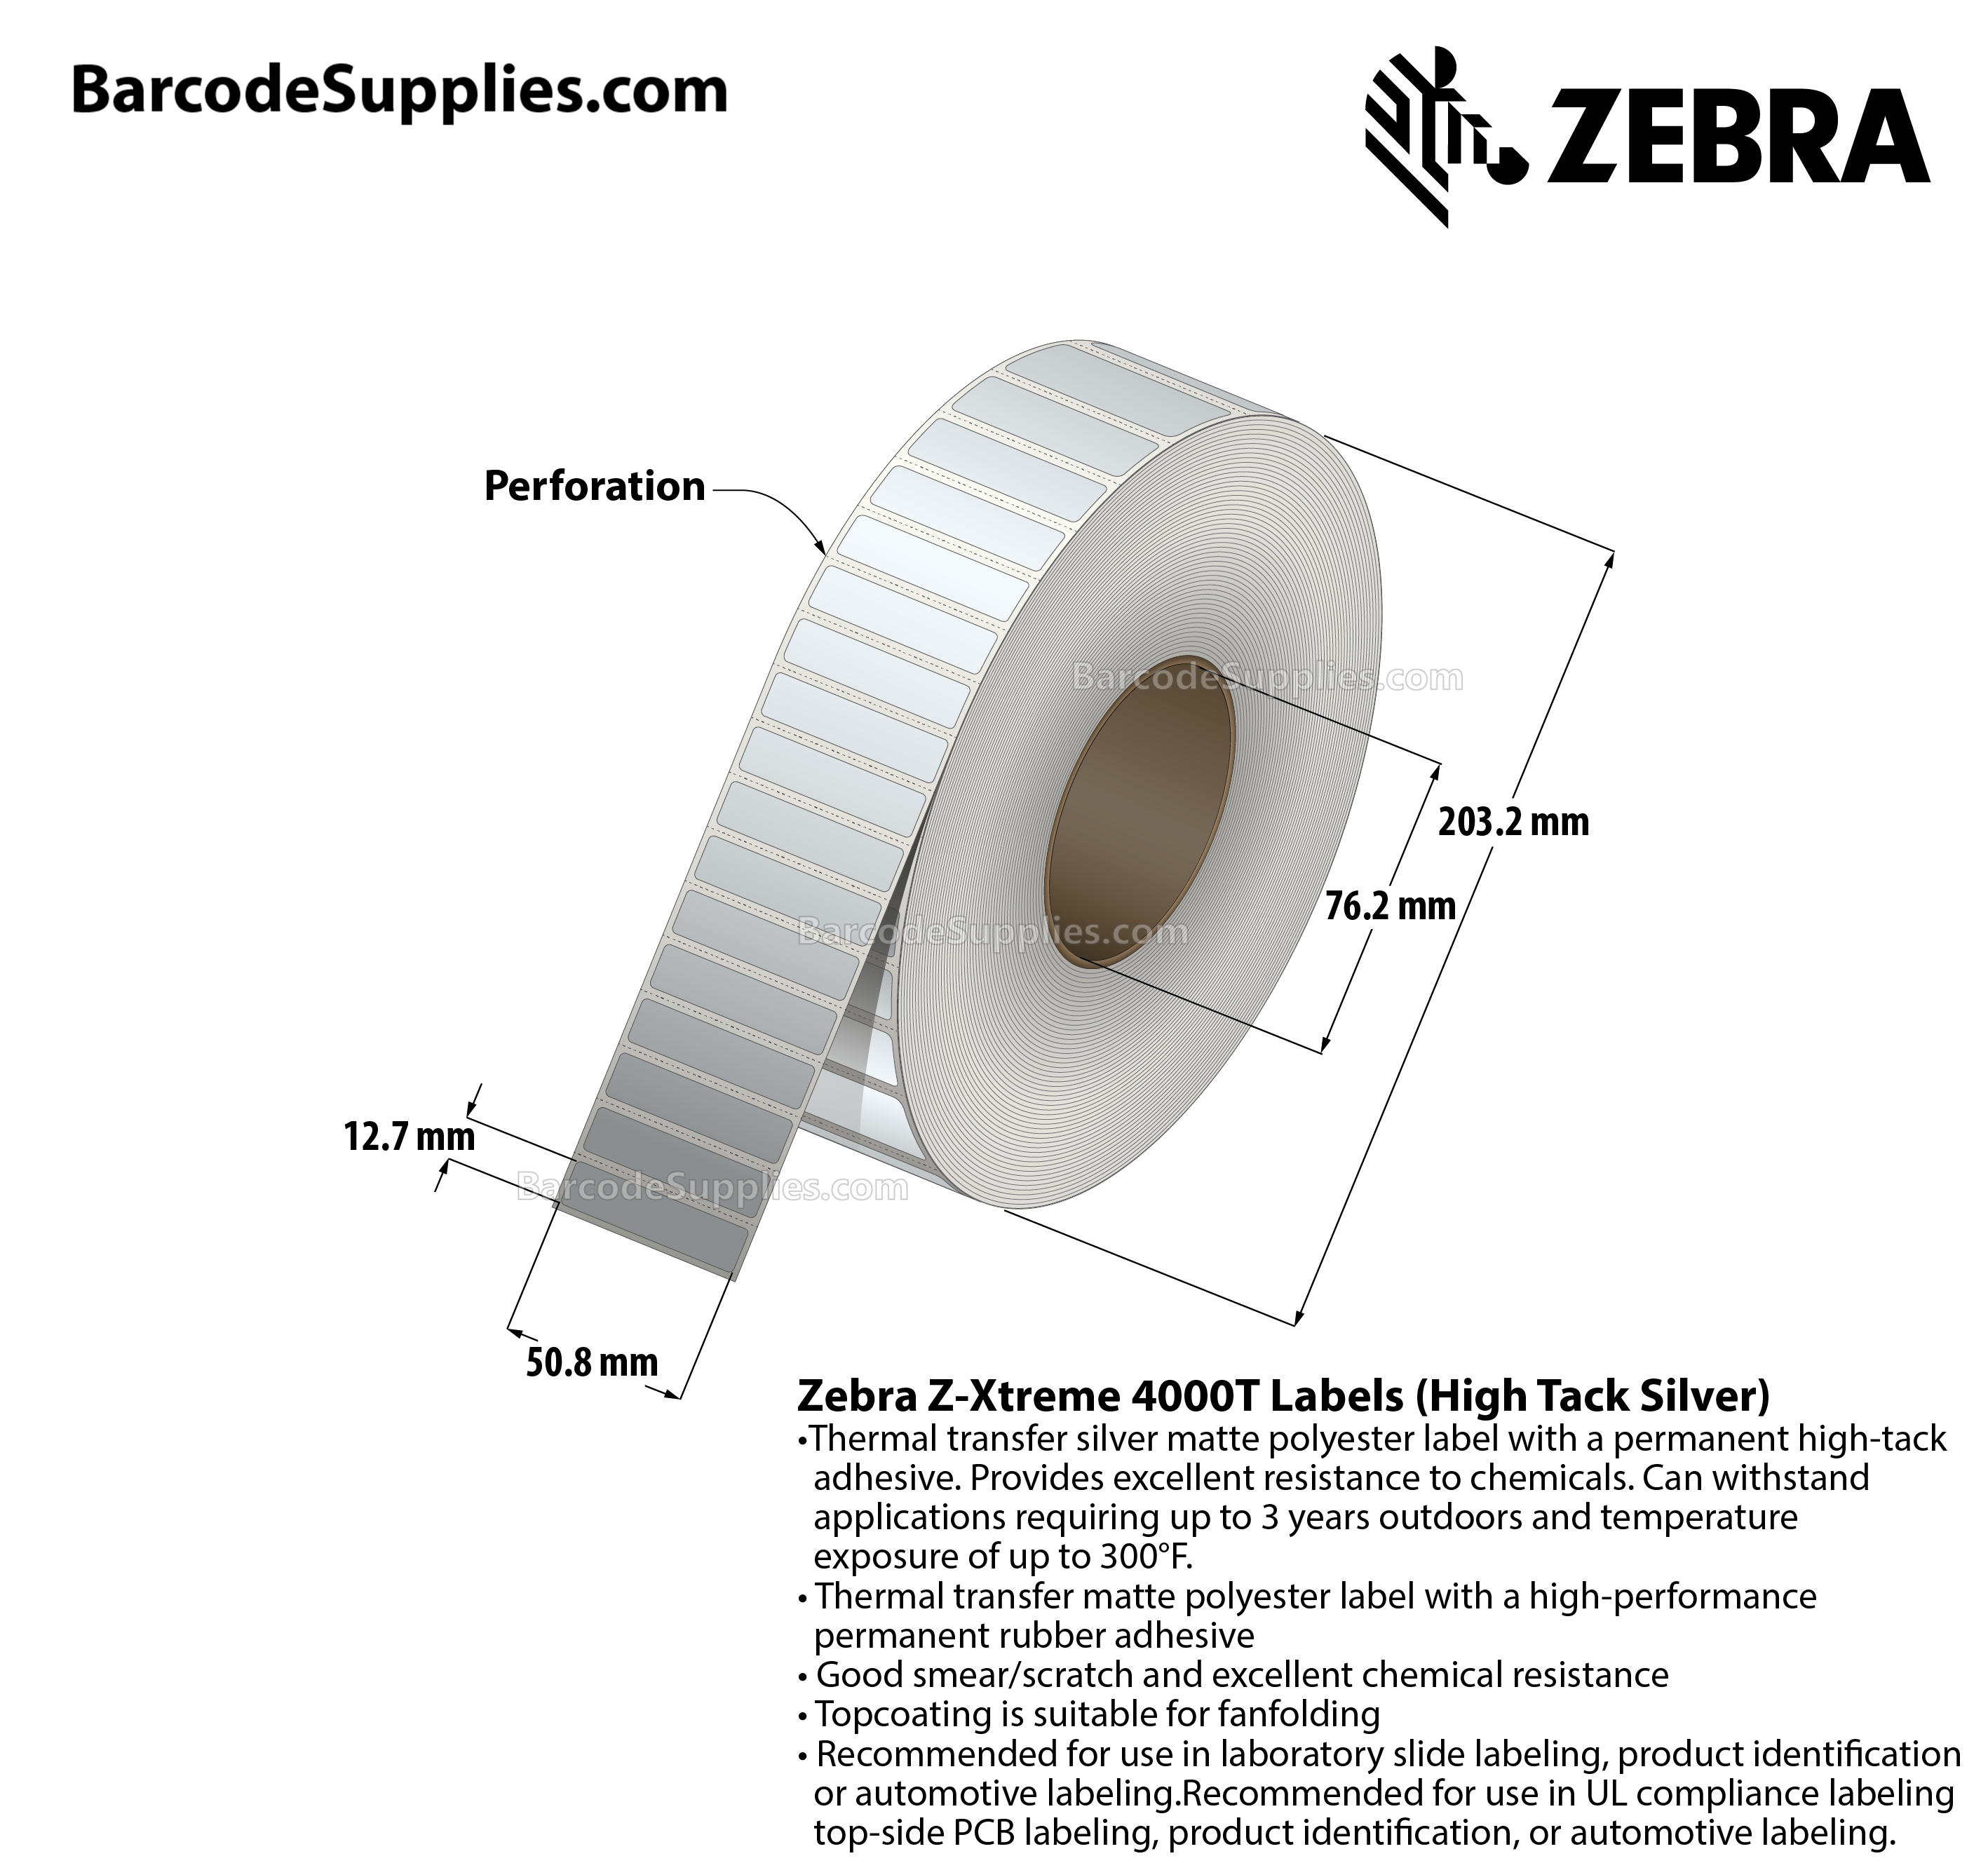 2 x 0.5 Thermal Transfer Silver Z-Xtreme 4000T High-Tack Silver Labels With High-tack Adhesive - Perforated - 3000 Labels Per Roll - Carton Of 1 Rolls - 3000 Labels Total - MPN: 10023173